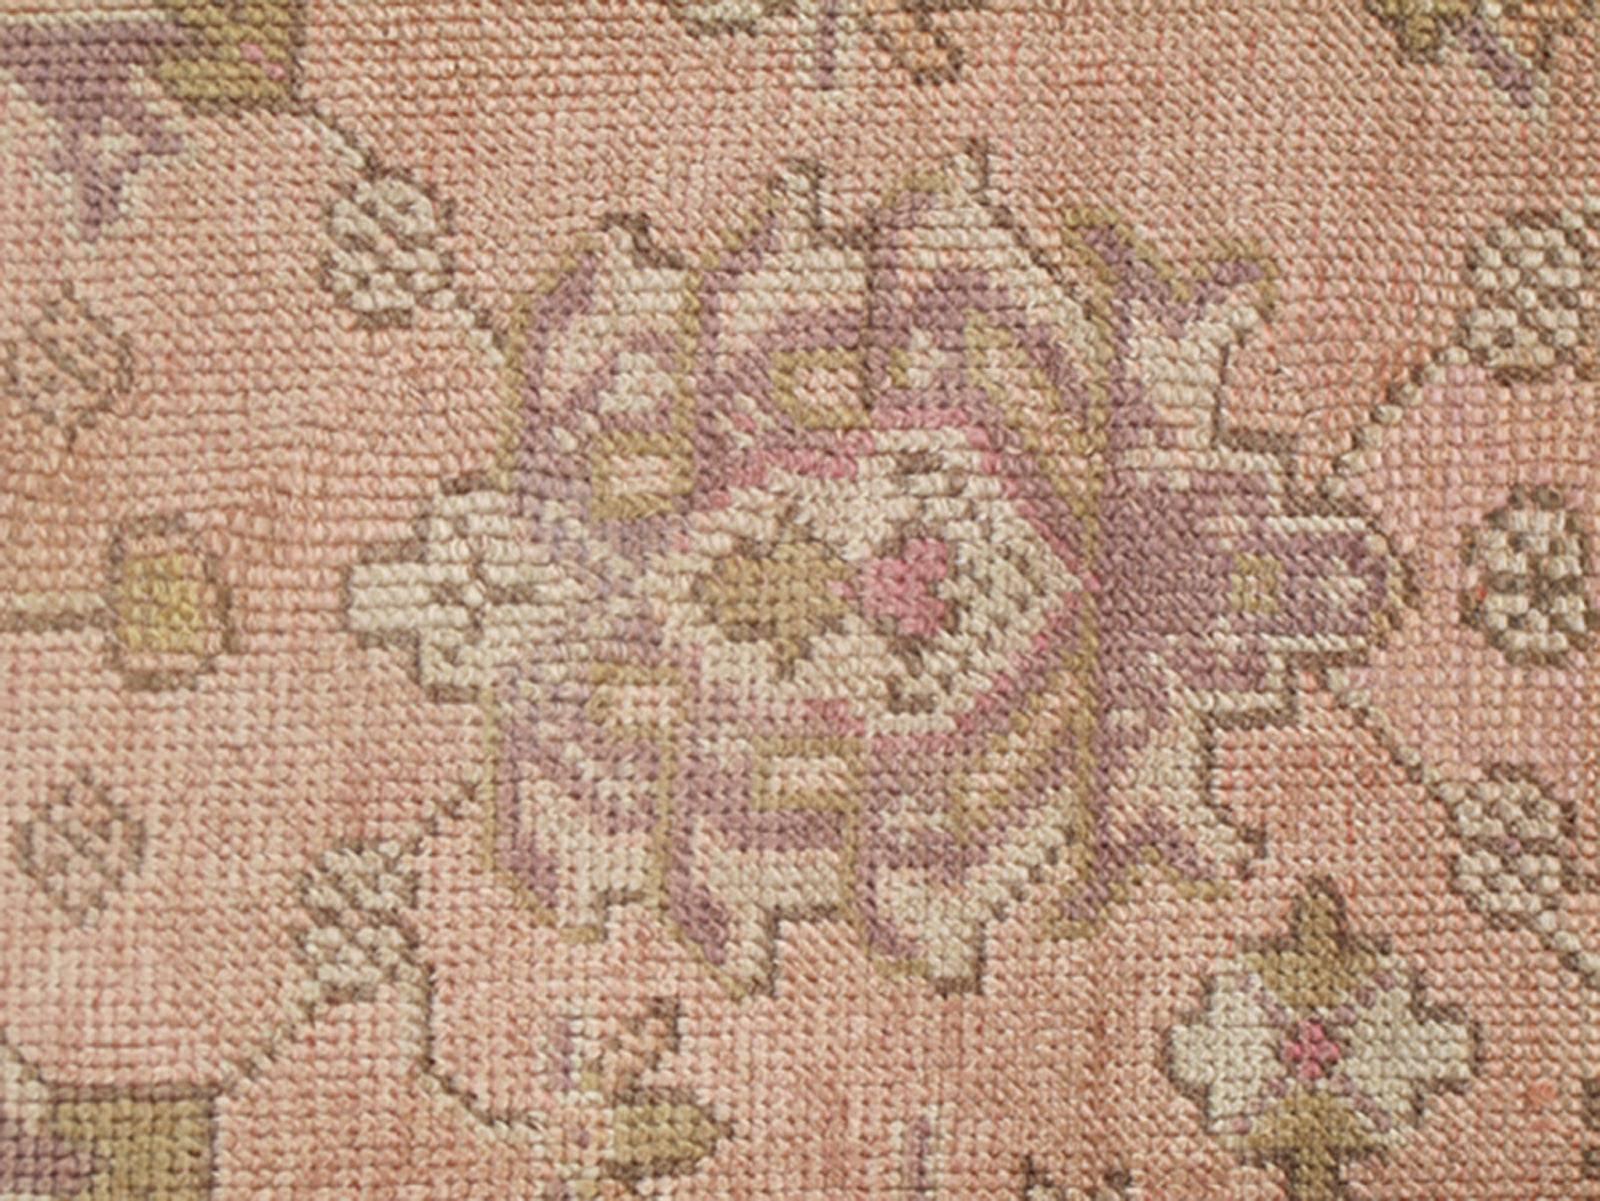 Antique Turkish Oushak Rug with Floral Motifs in Lavender, Coral-Pink, and Green For Sale 1